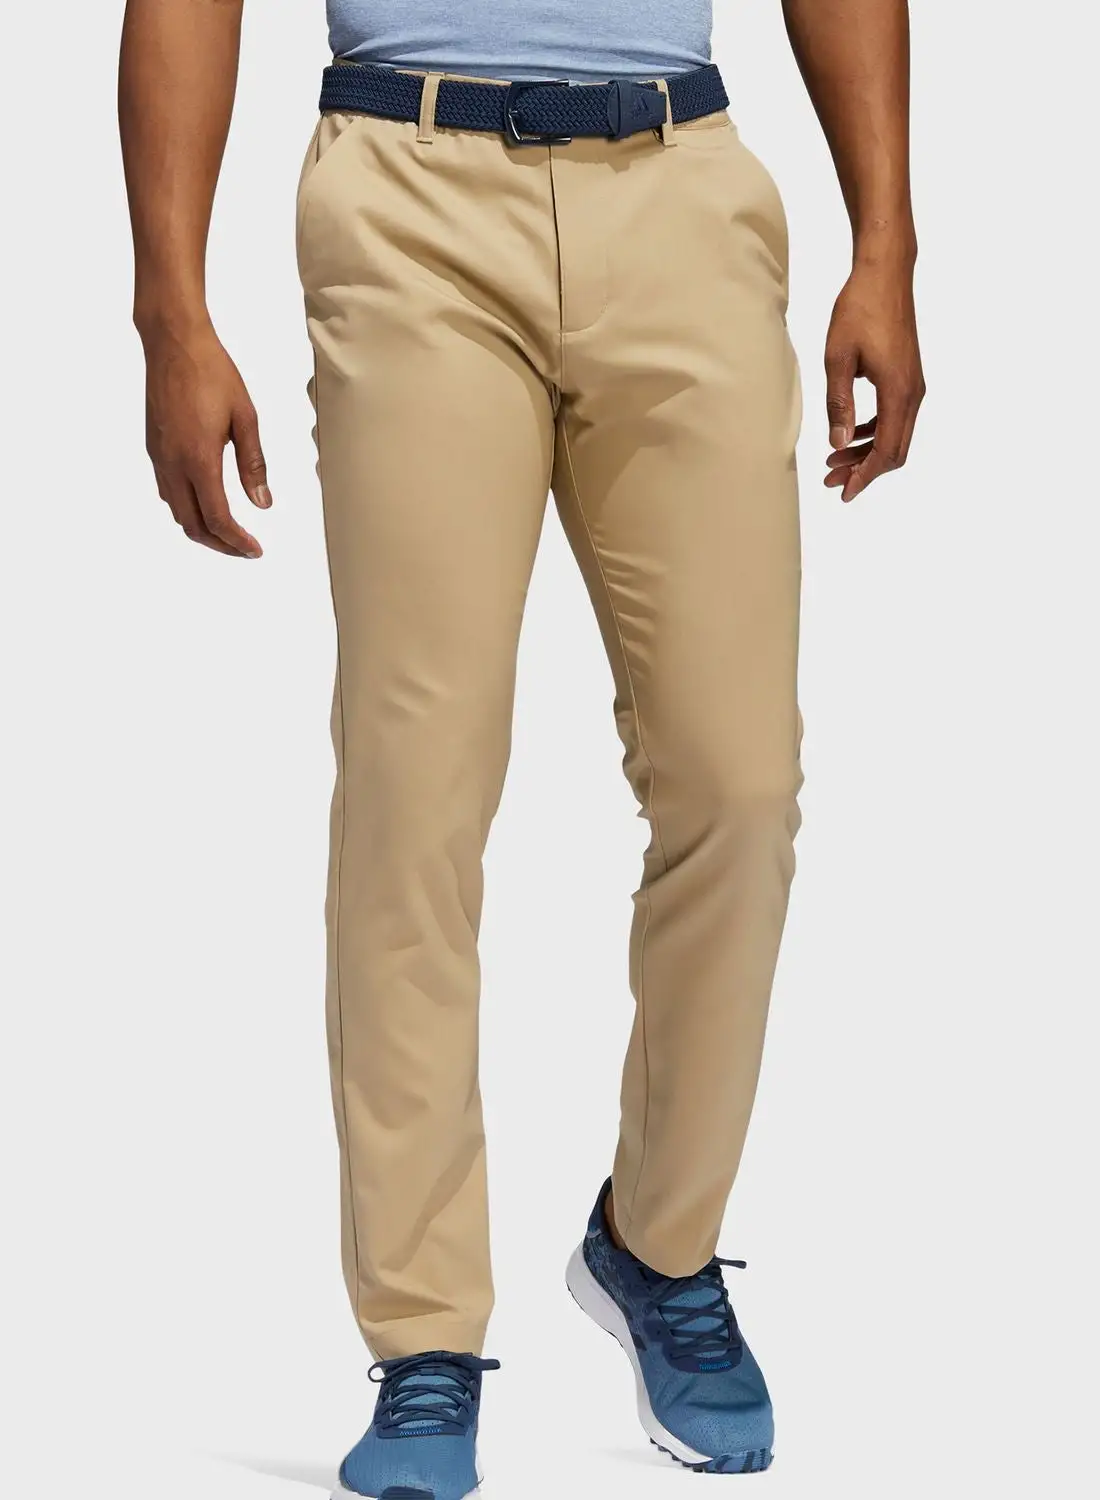 Adidas Ultimate365 Tapered Pants